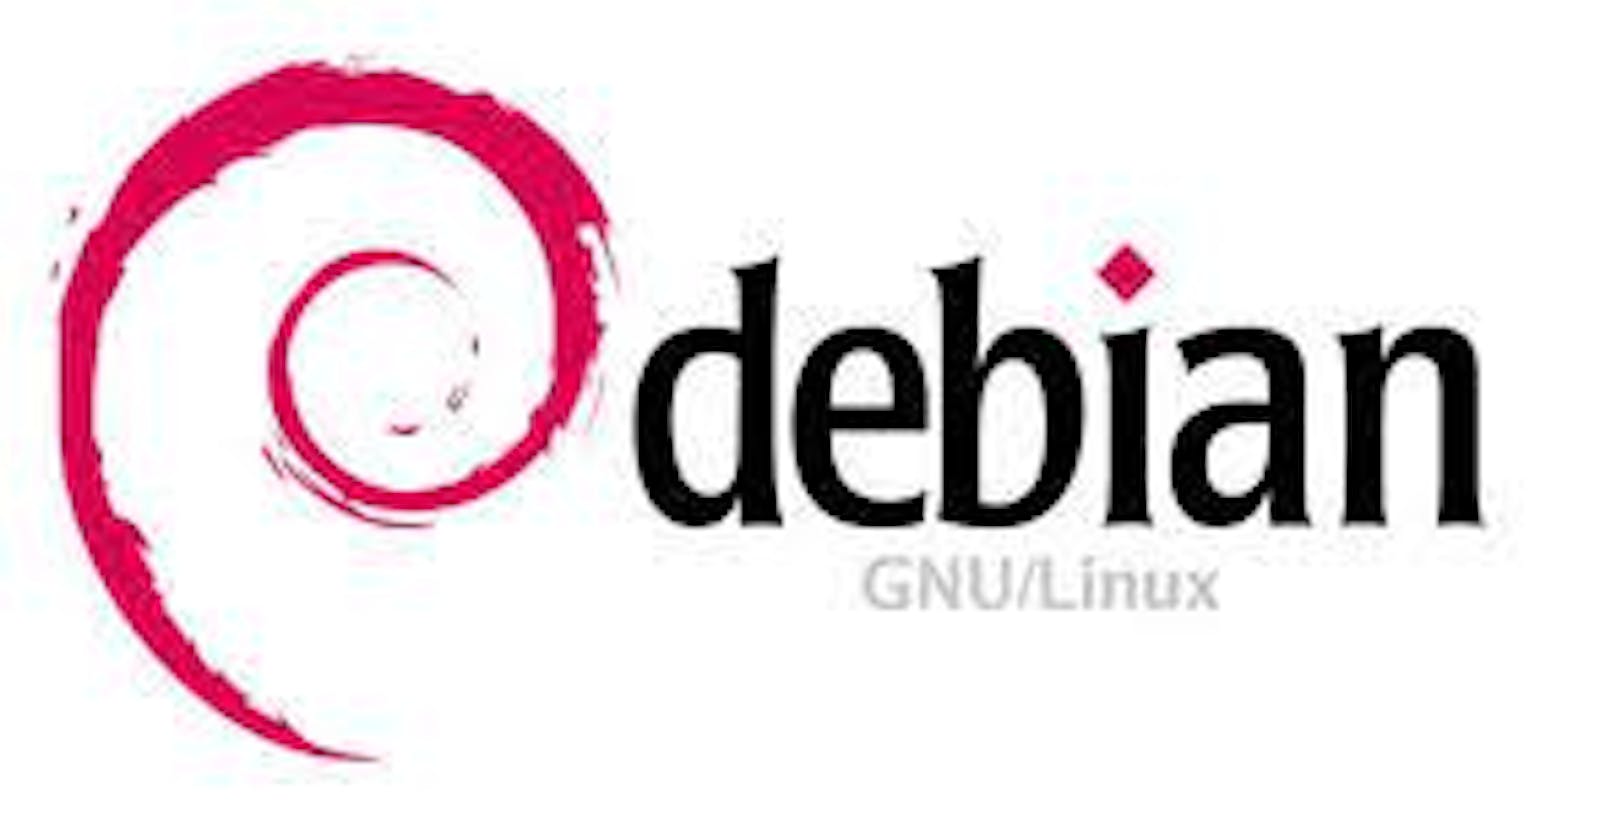 How to determine if your Linux distribution is Debian-based